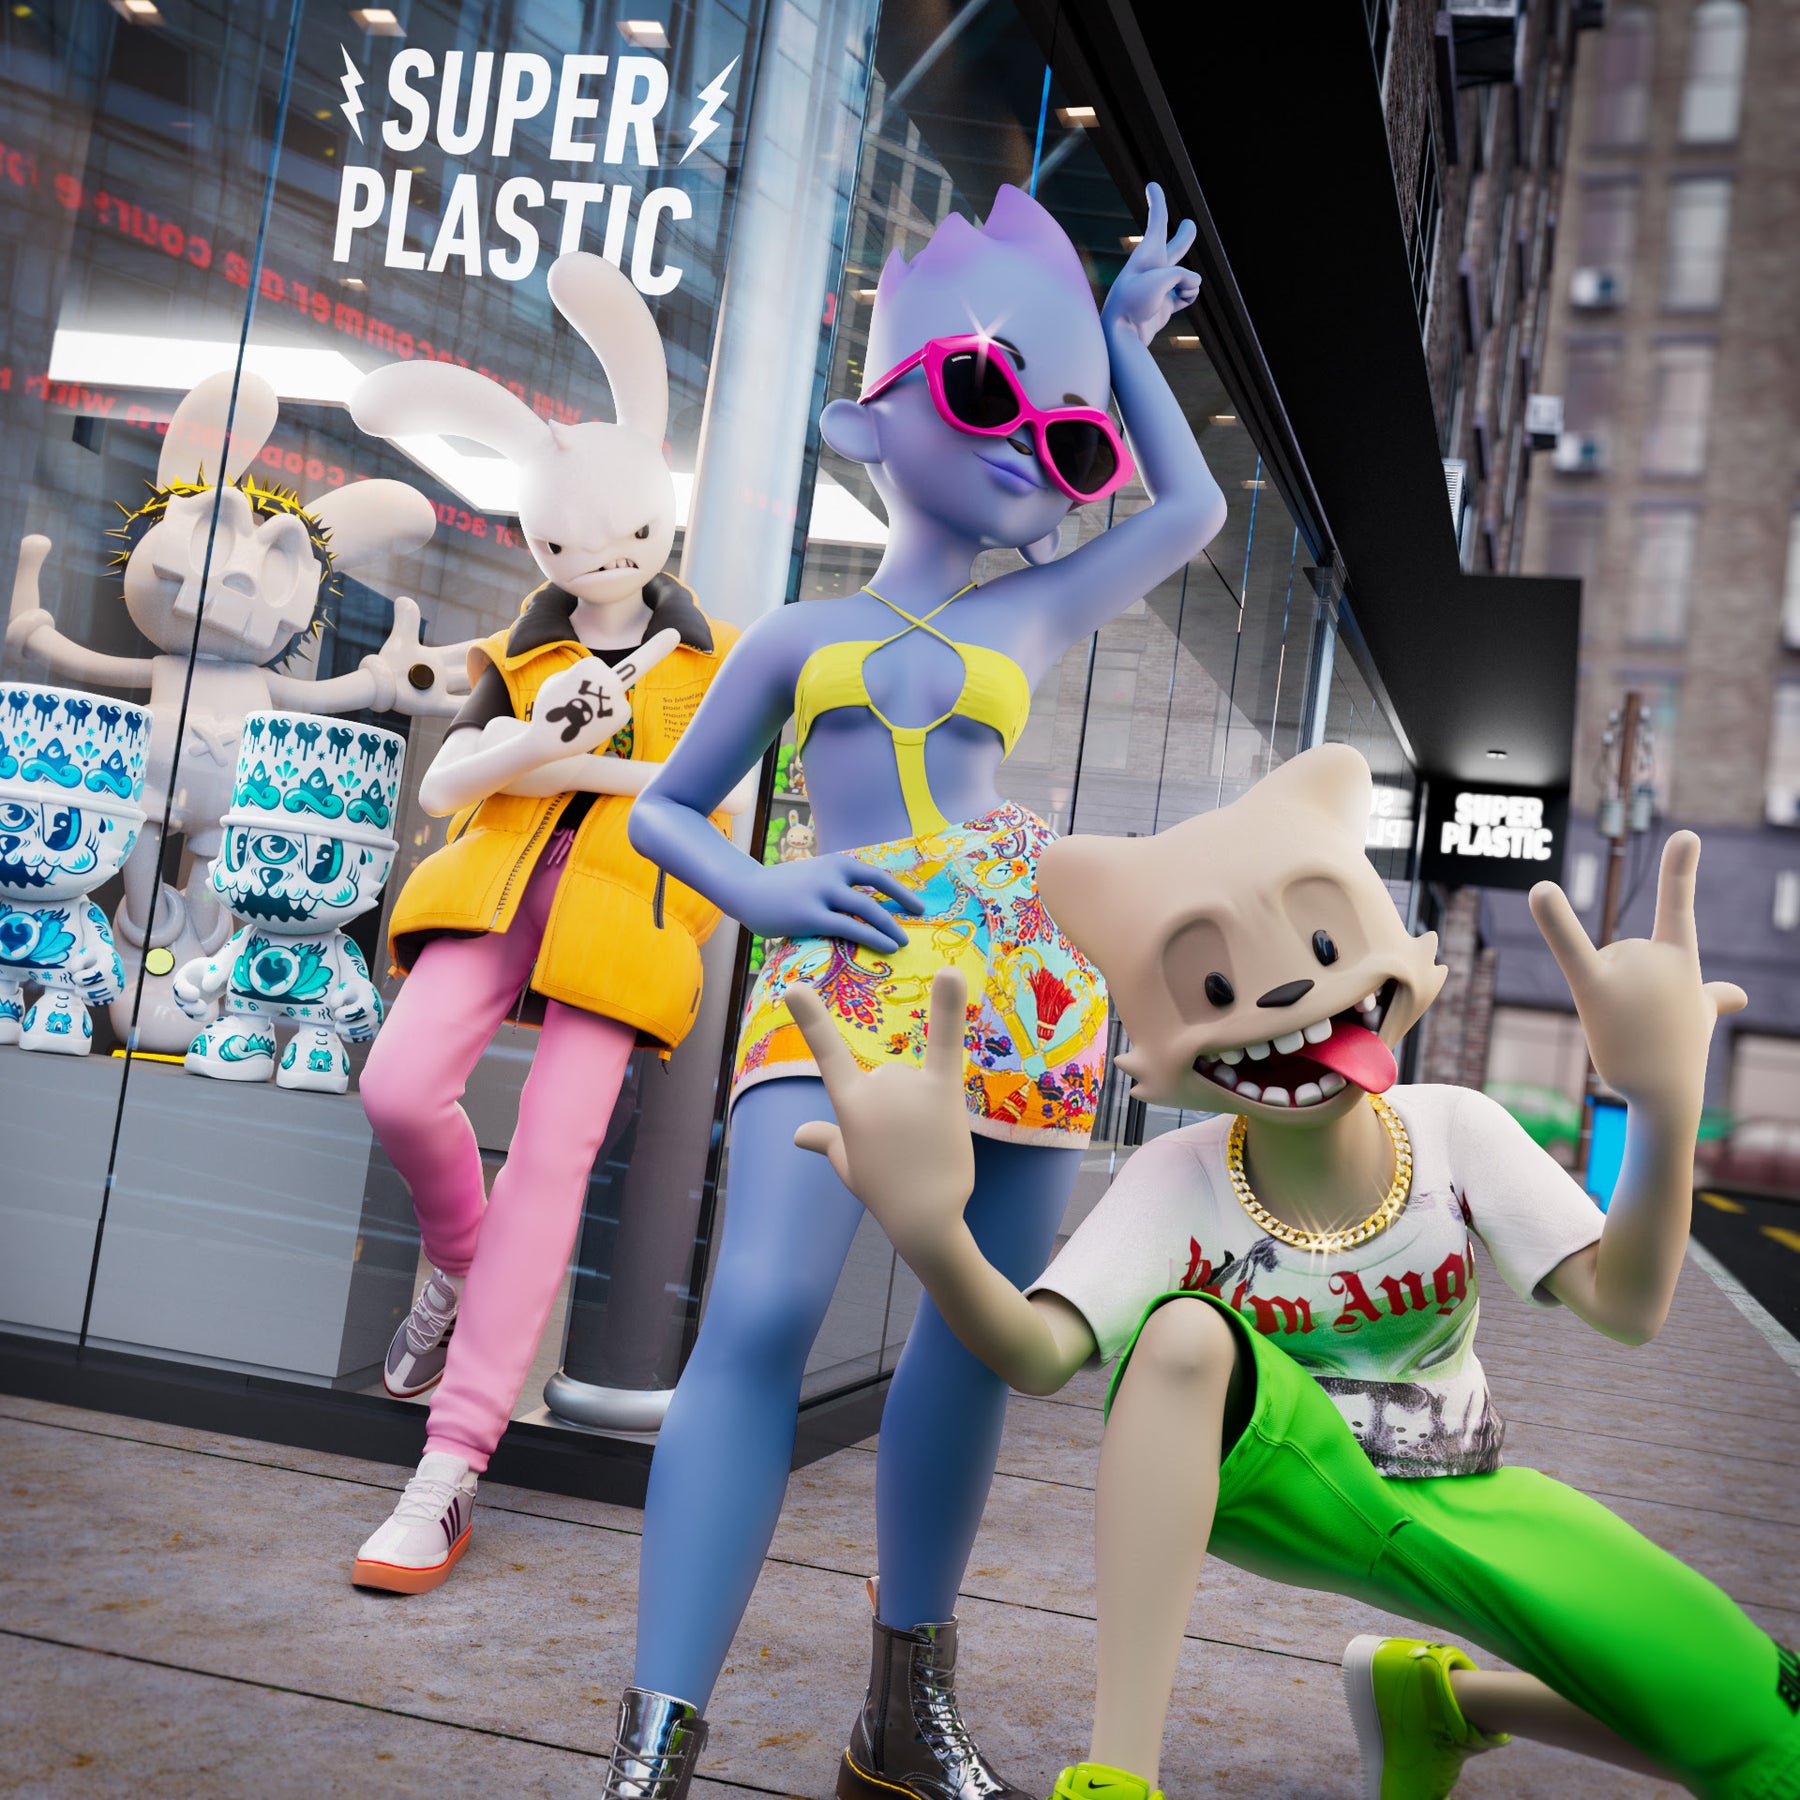 The Superplastic NYC store OPENS July 28TH ! ! !